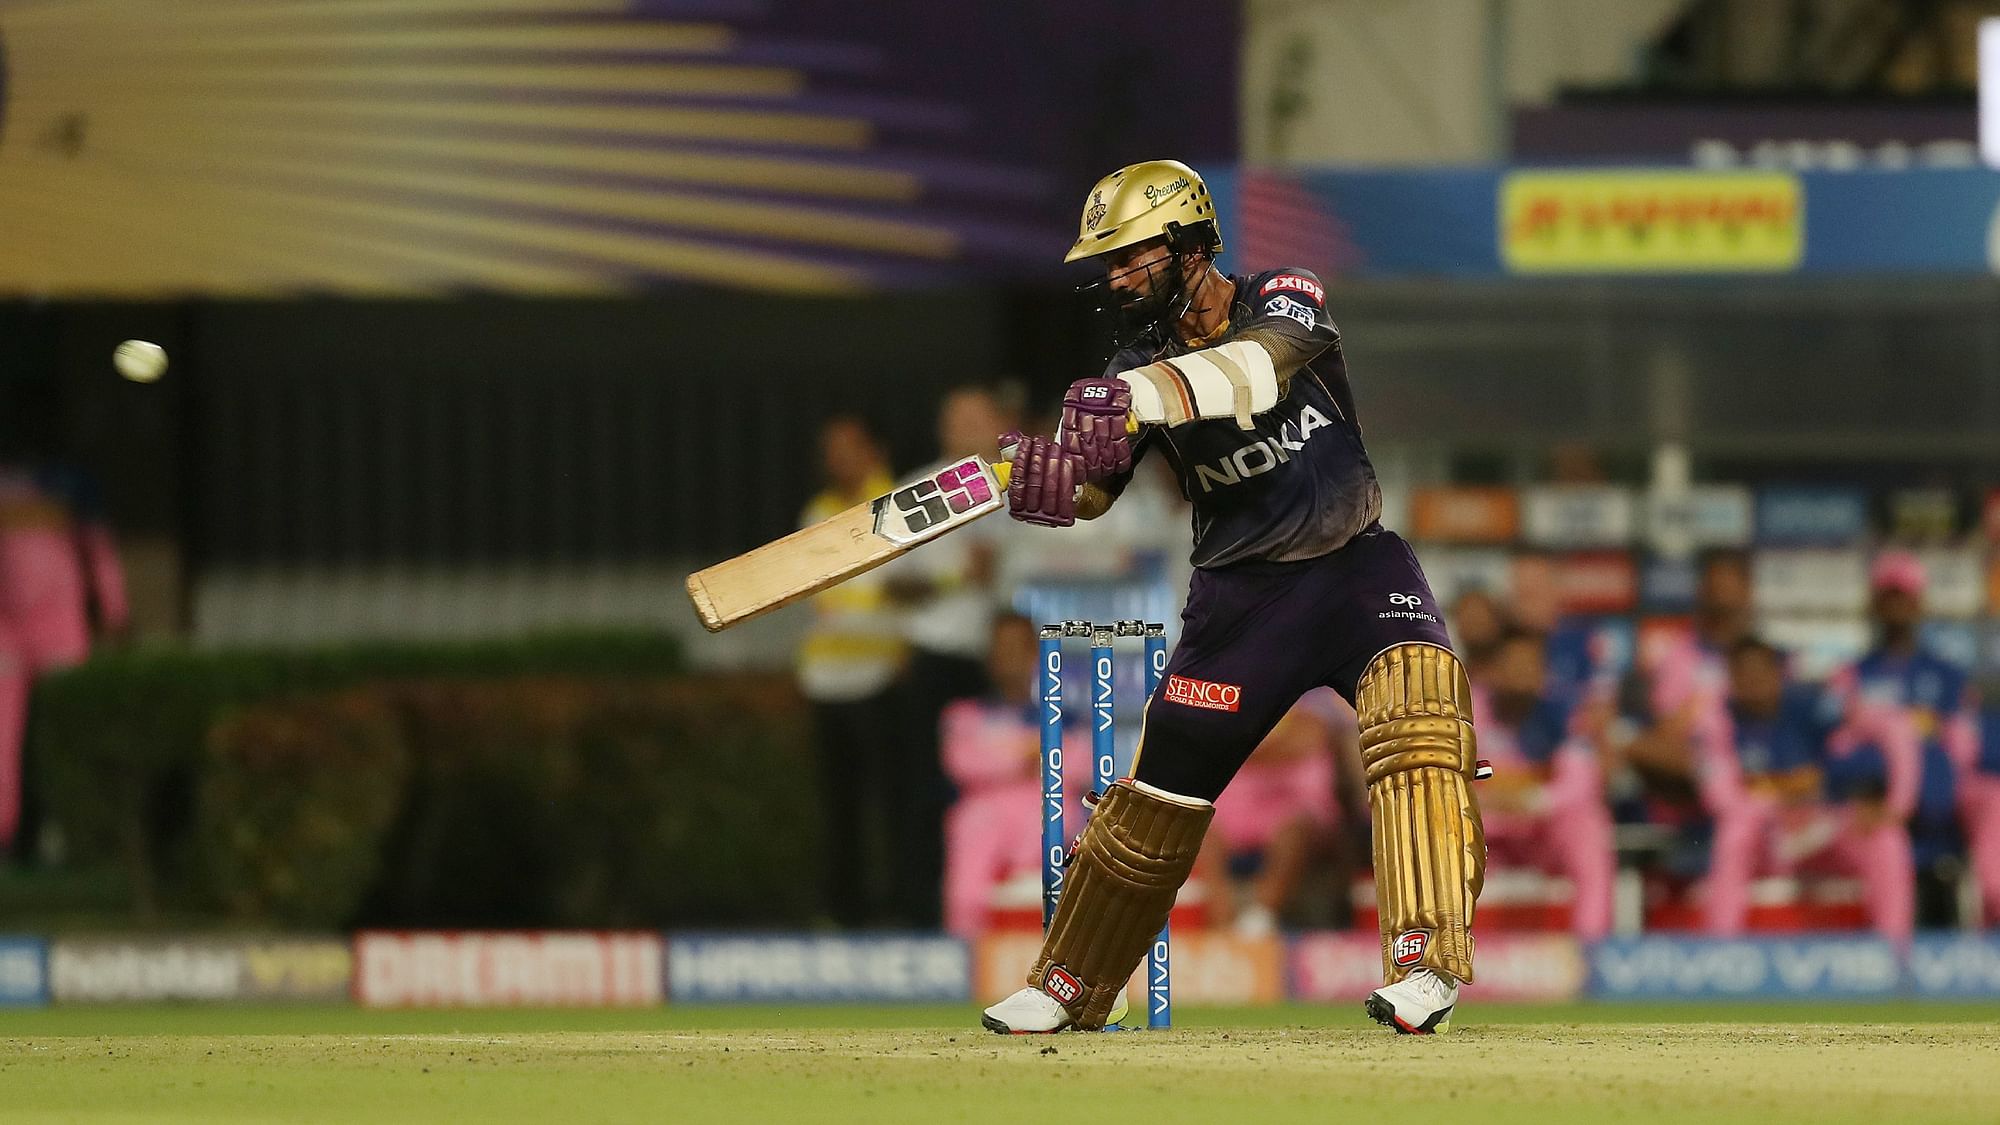 Dinesh Karthik promoted himself to No. 4 and smashed nine sixes and seven fours in his 50-ball unbeaten knock of 97.